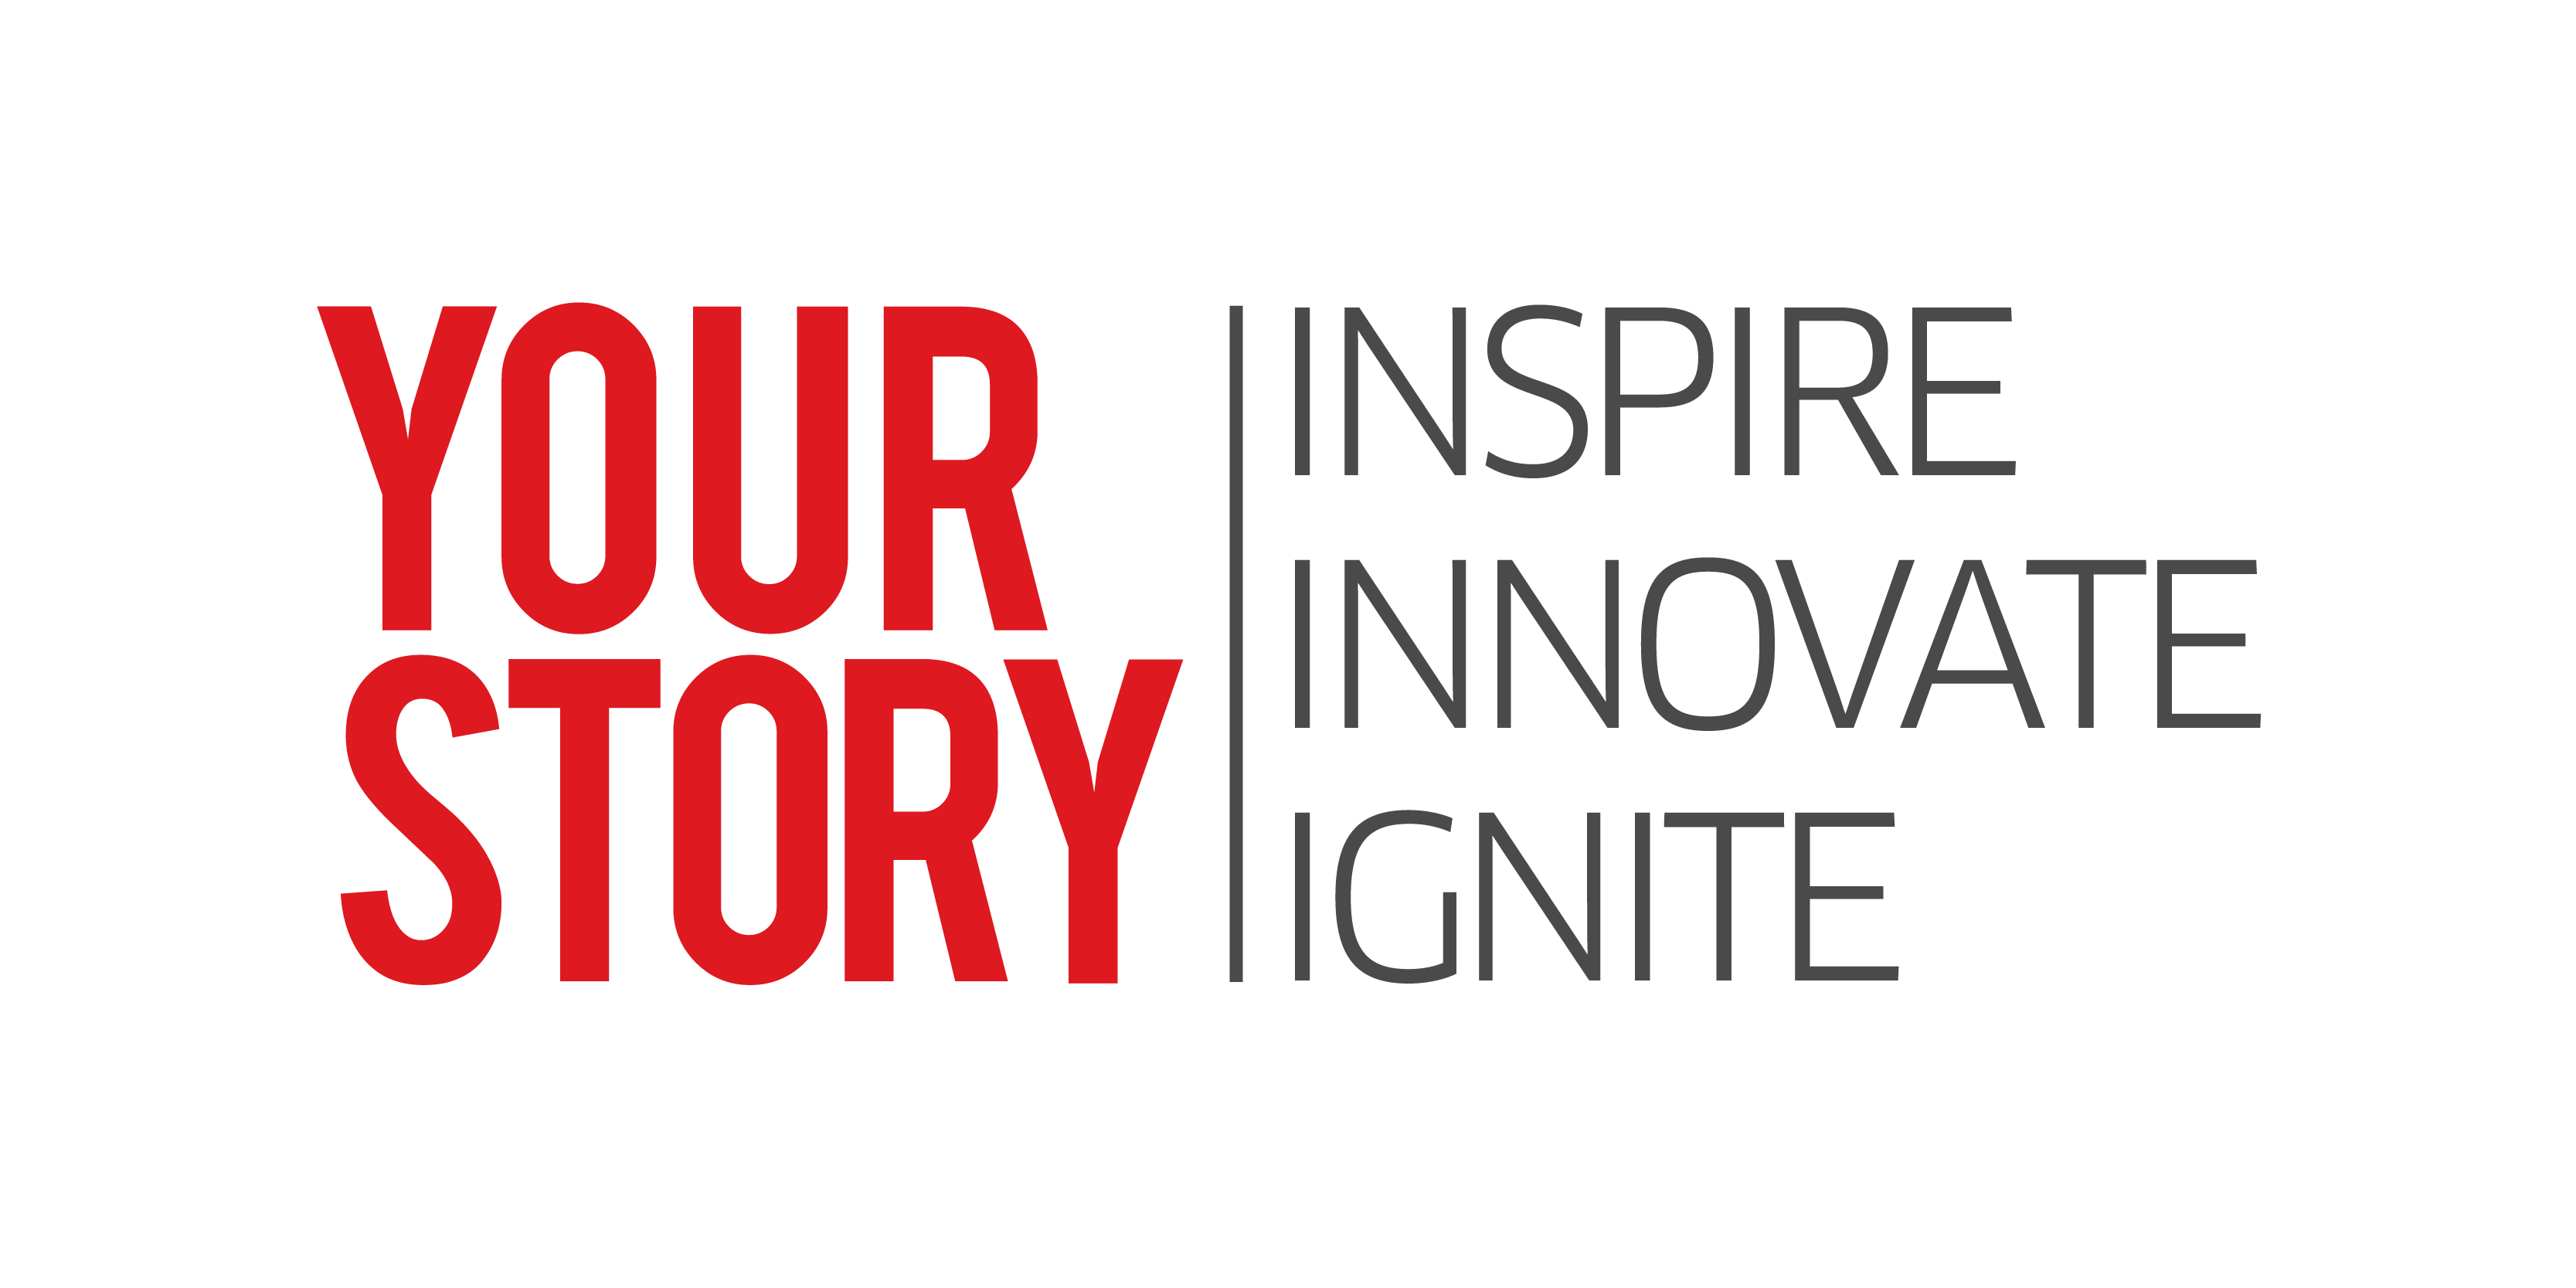 YourStory Logo